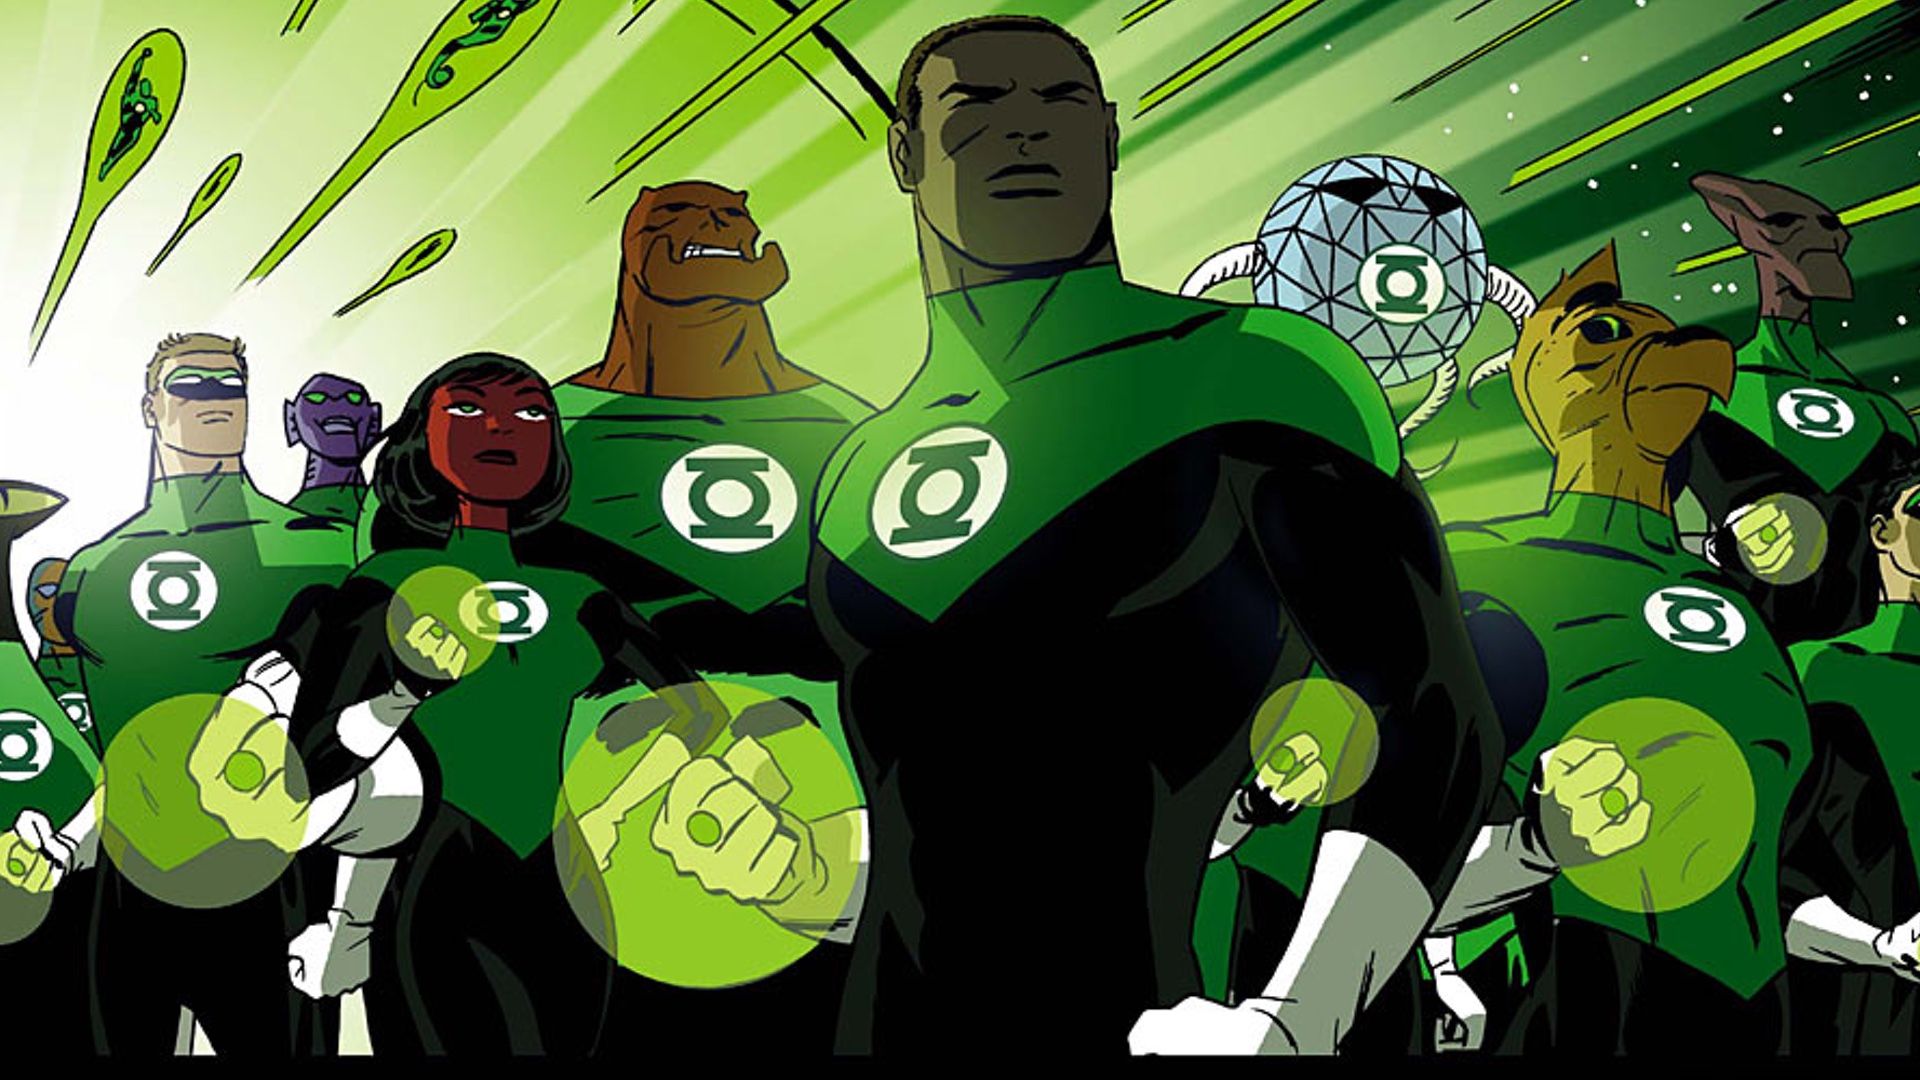 GREEN LANTERN CORPS May End Up Being Helmed By RISE OF THE PLANET OF THE APES Director Rupert Wyatt